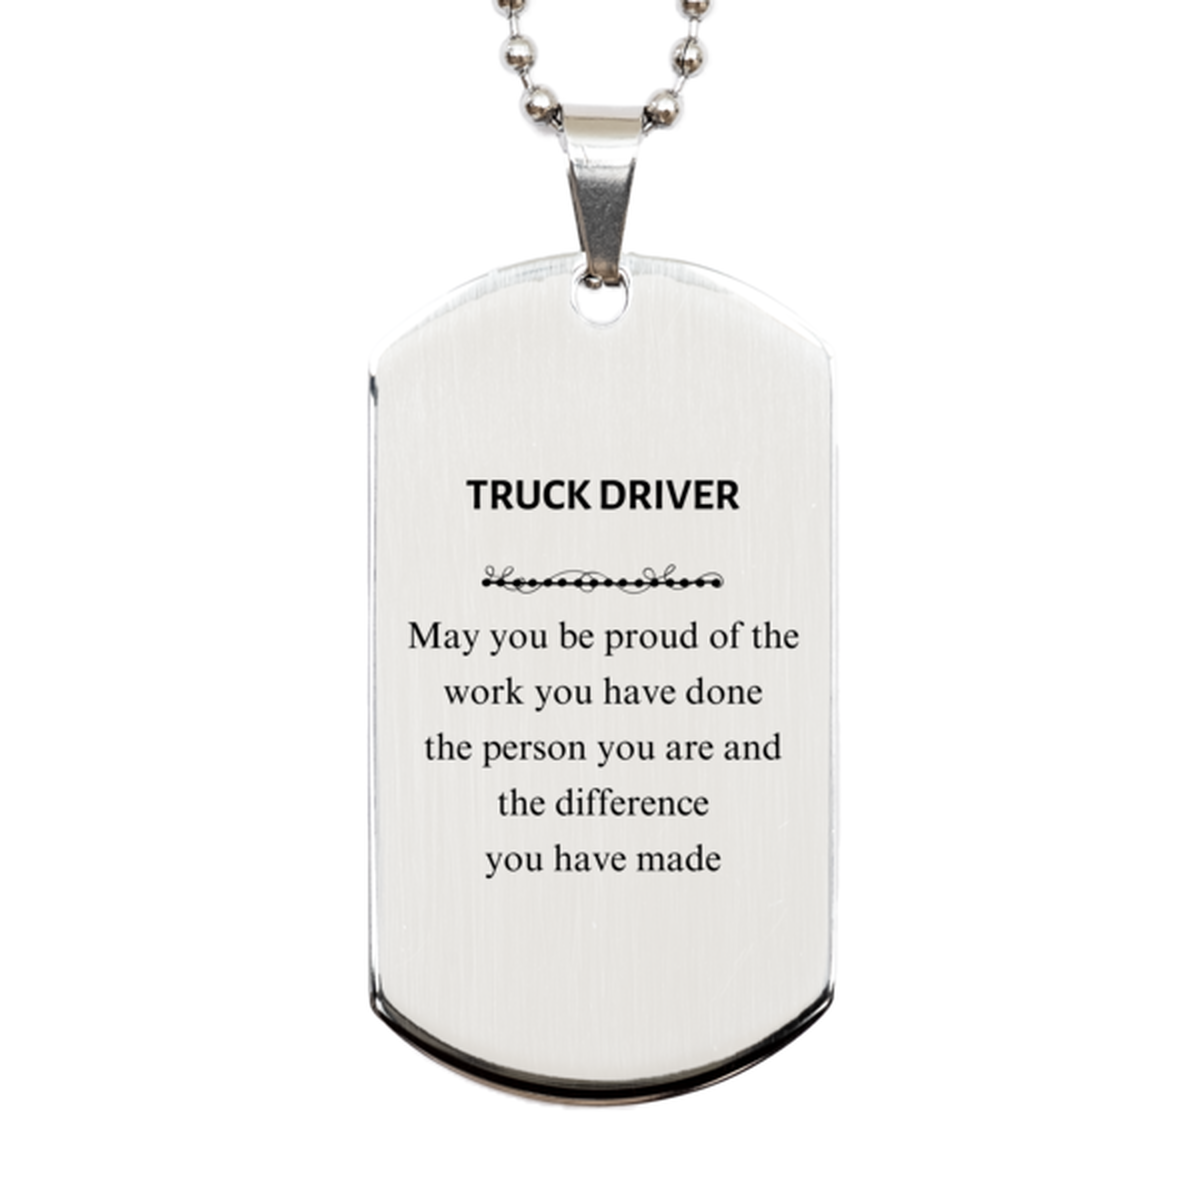 Truck Driver May you be proud of the work you have done, Retirement Truck Driver Silver Dog Tag for Colleague Appreciation Gifts Amazing for Truck Driver